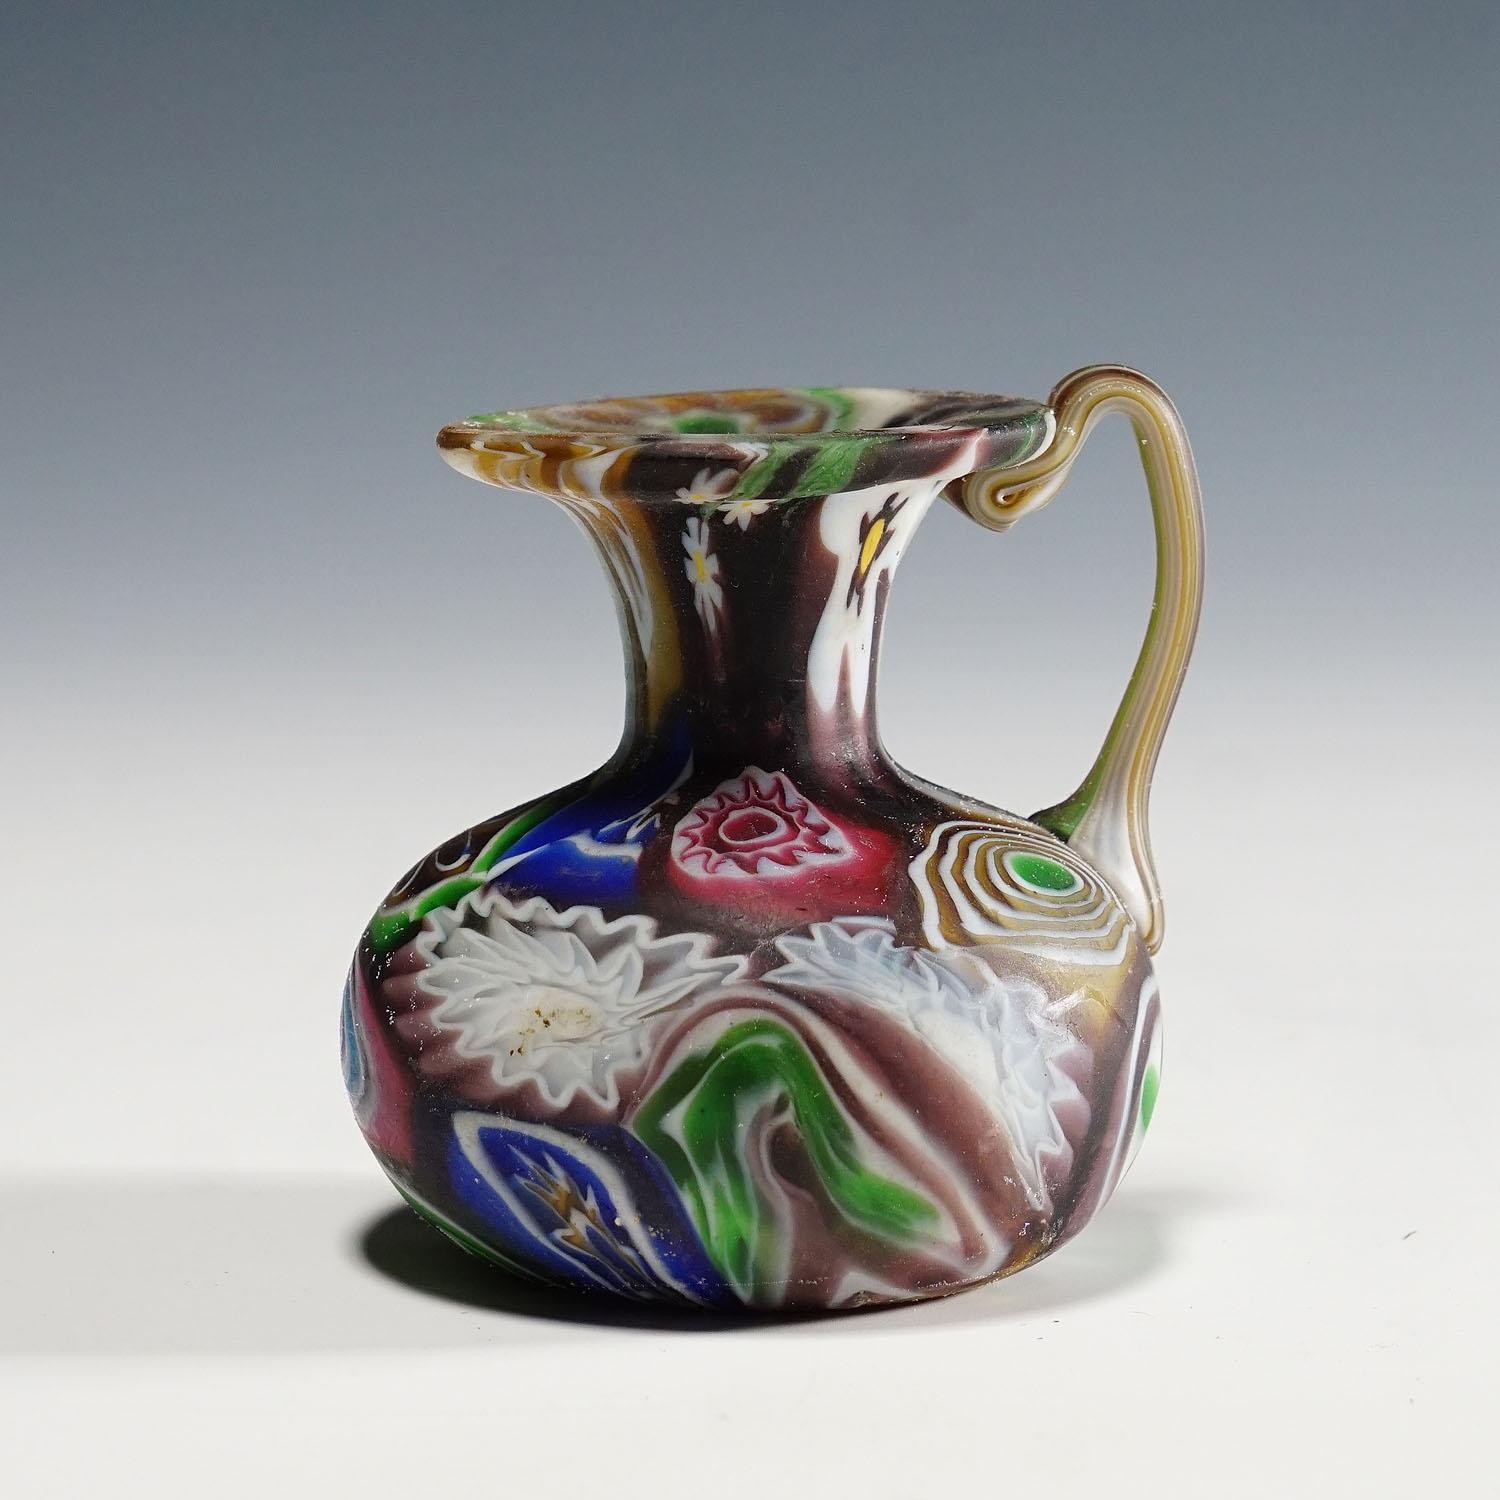 Fratelli Toso Millefiori Pitcher with Multicoloured Murrines, Murano 1910

A nice Millefiori murrine glass pitcher, manufactured by Vetreria Fratelli Toso, Murano around 1910. Manufactured with multicoloured polychrome murrines and an acid etched